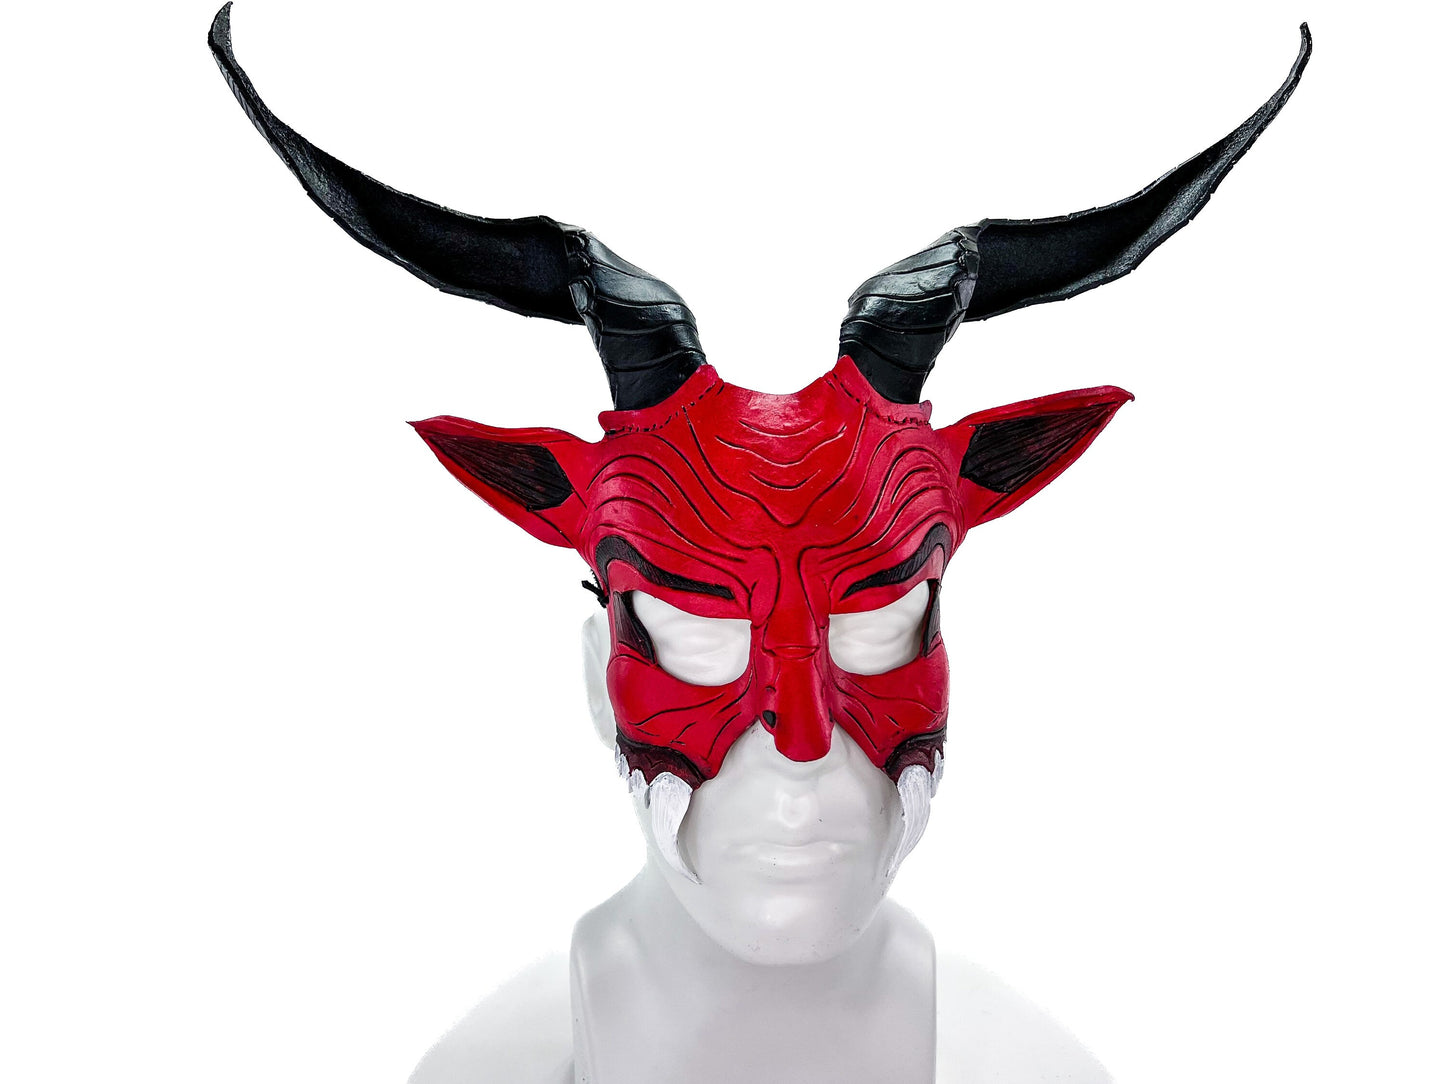 Krampus Handmade Genuine Leather Mask for Masquerade Cosplay or Halloween Costumes